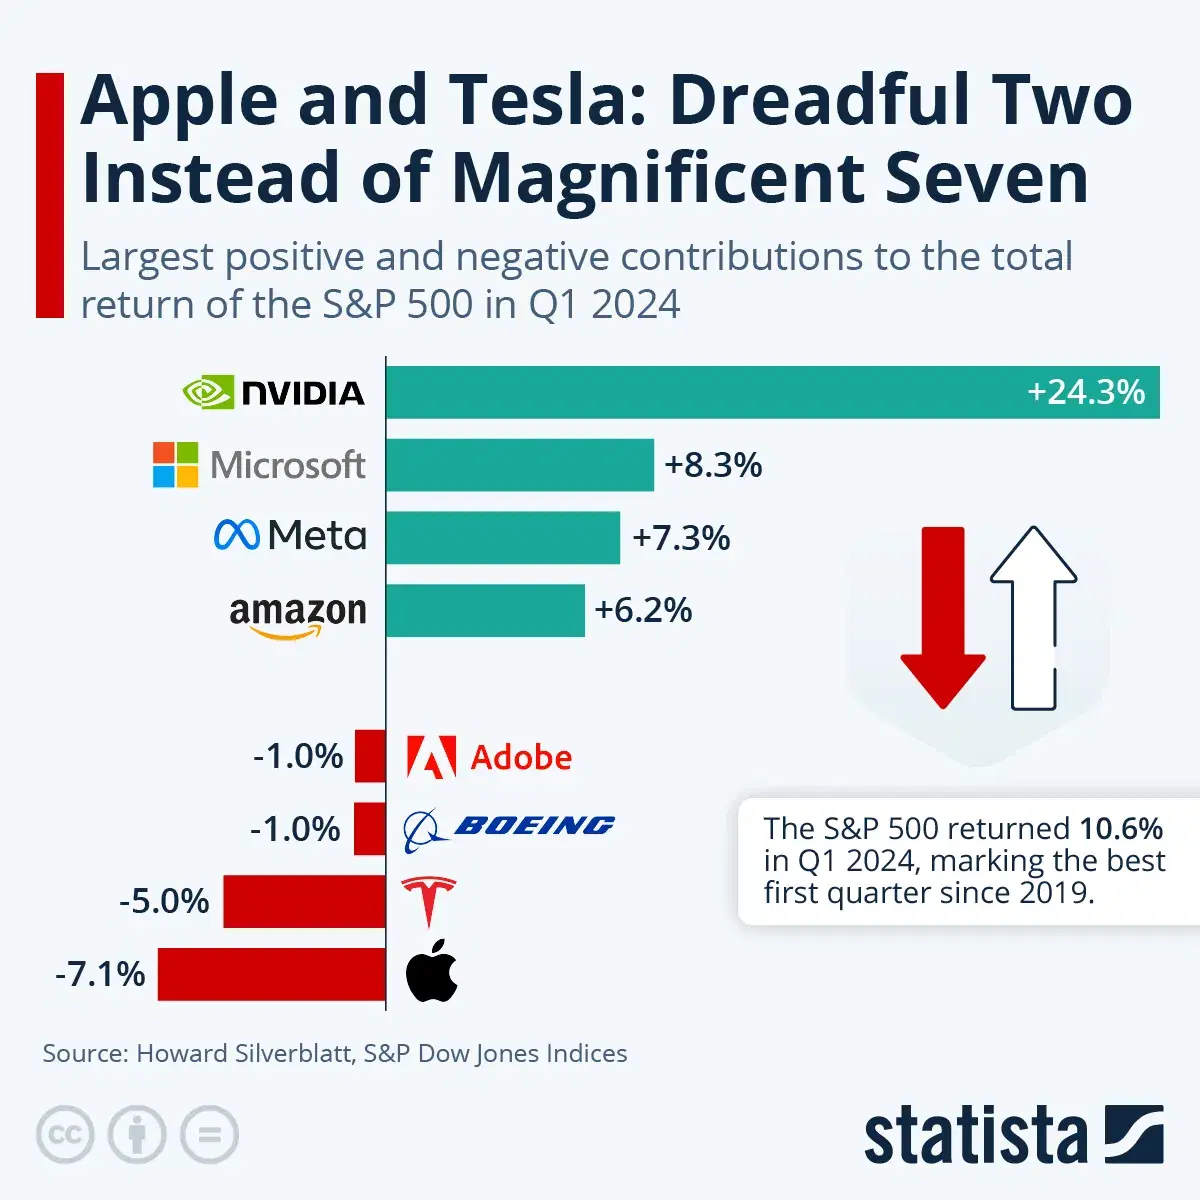 Apple and Tesla: Dreadful Two Instead of Magnificent Seven